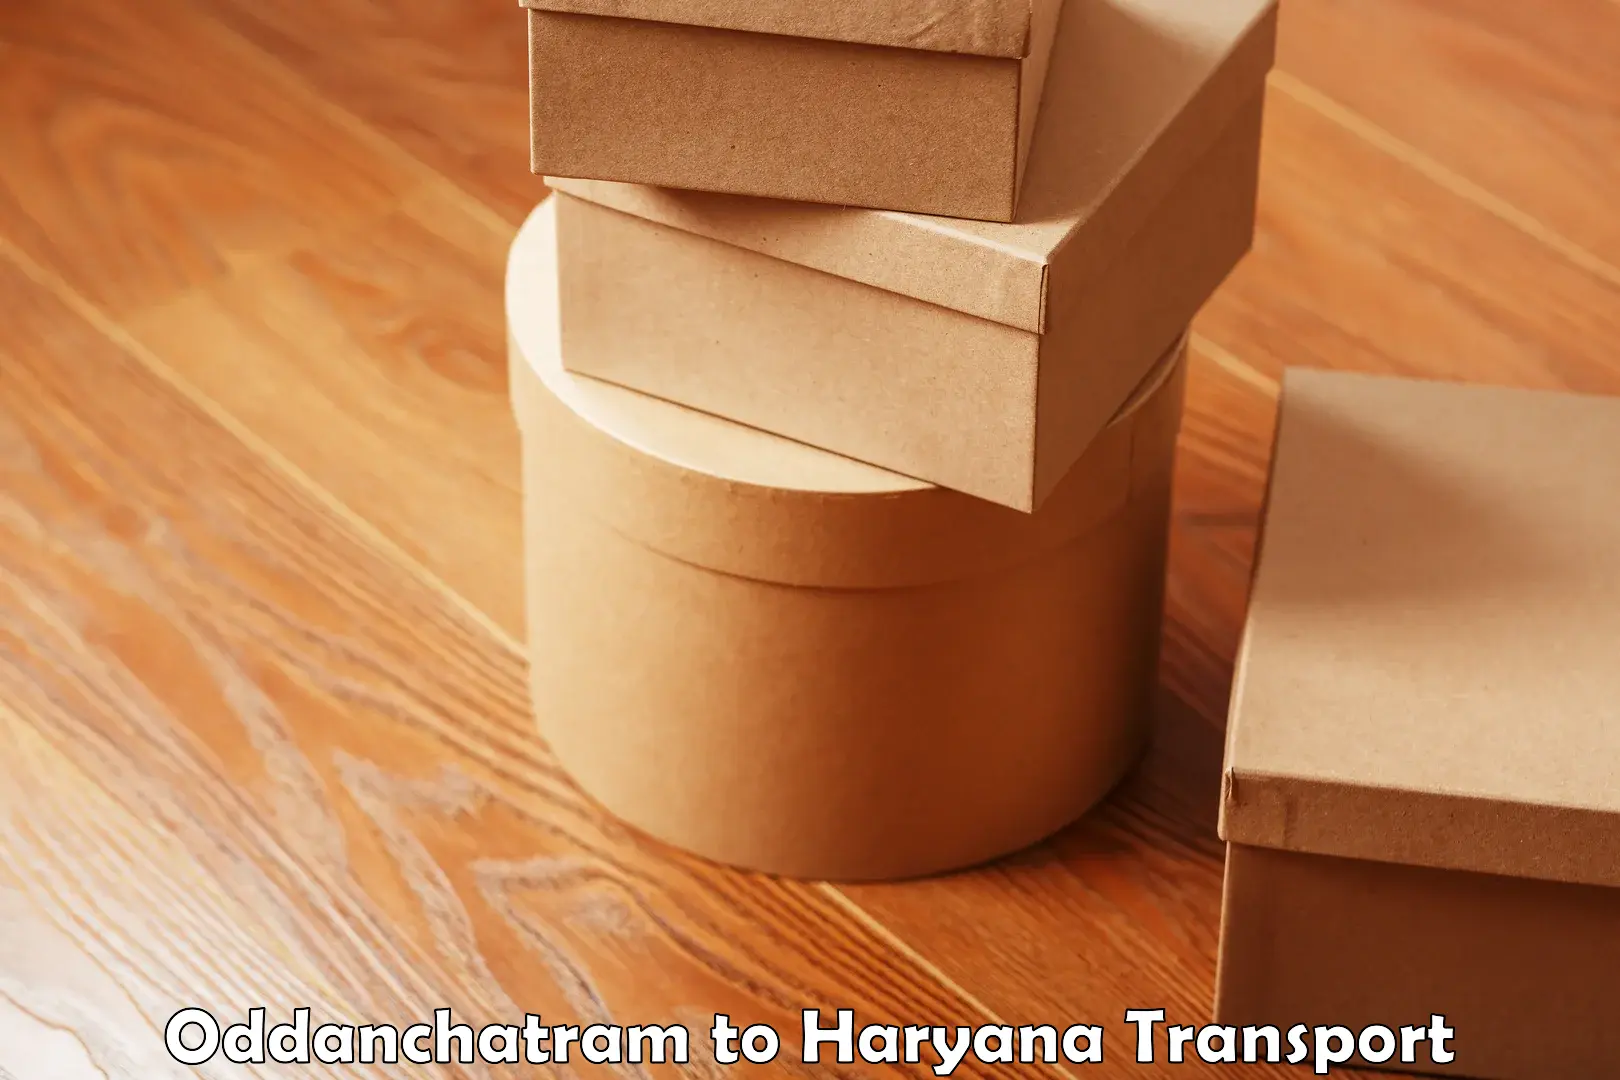 Container transportation services Oddanchatram to Haryana